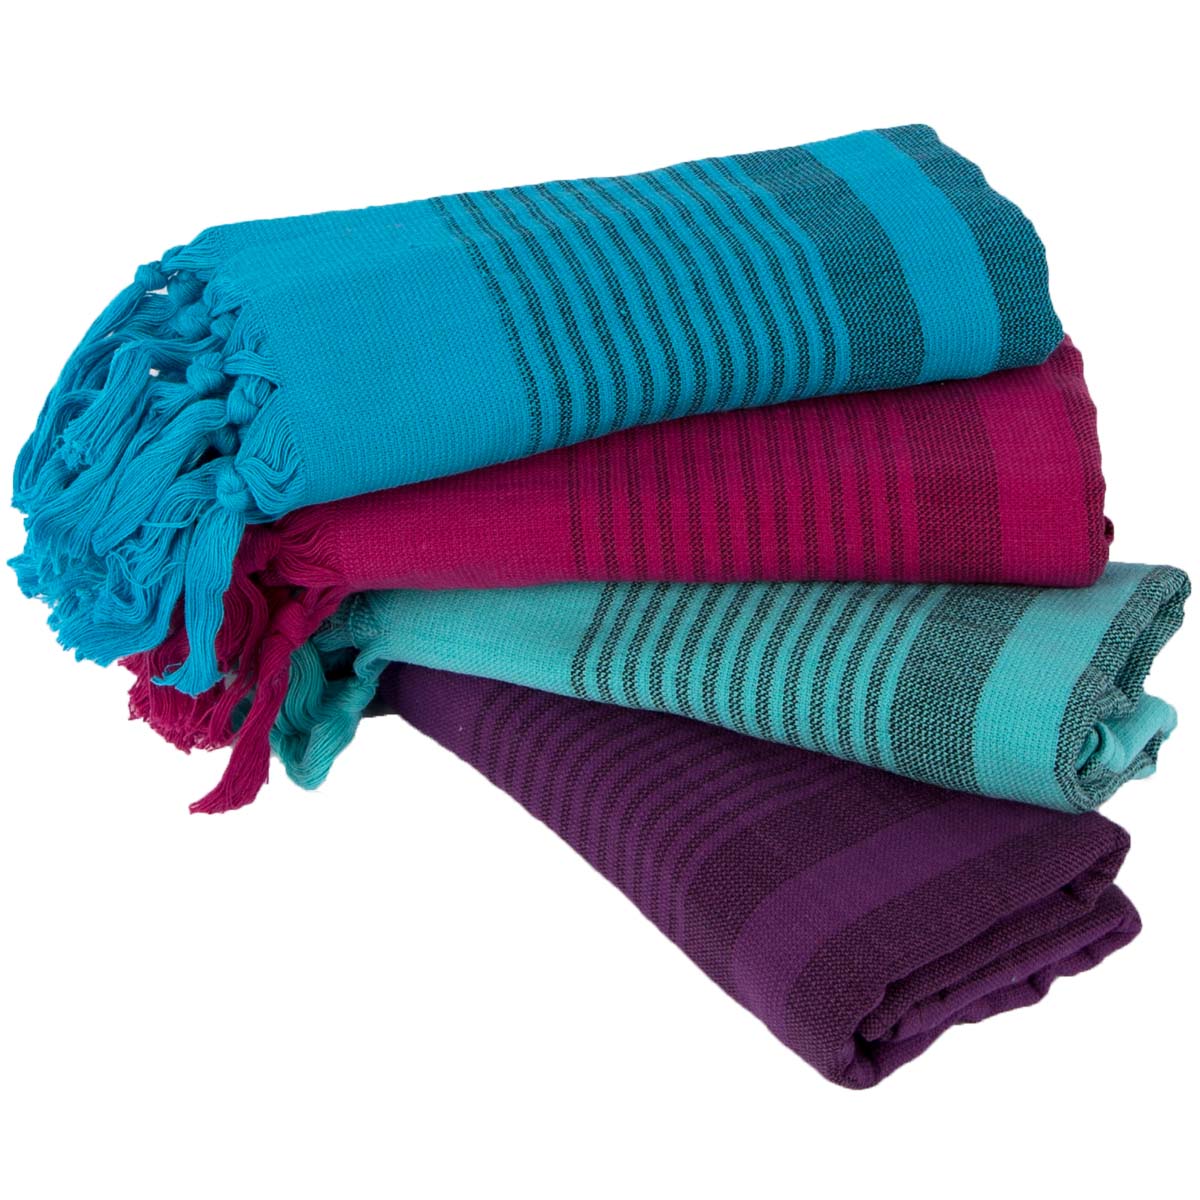 Turkish Hand Towels for Bathroom Set of 4 - 18 x 40 inches